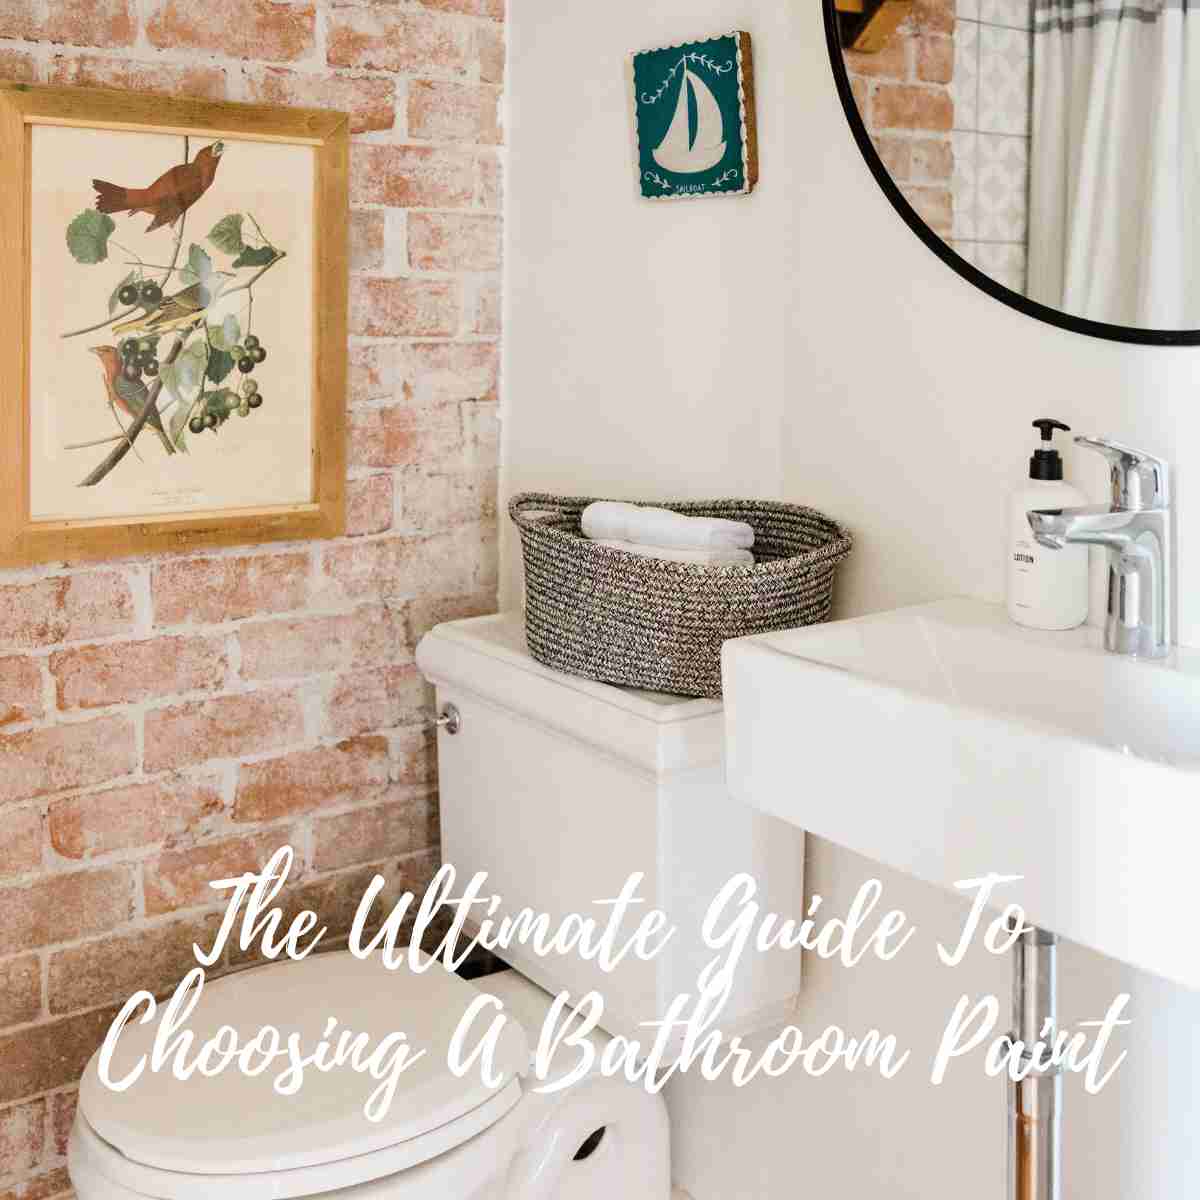 The Ultimate Guide To Choosing A Bathroom Paint